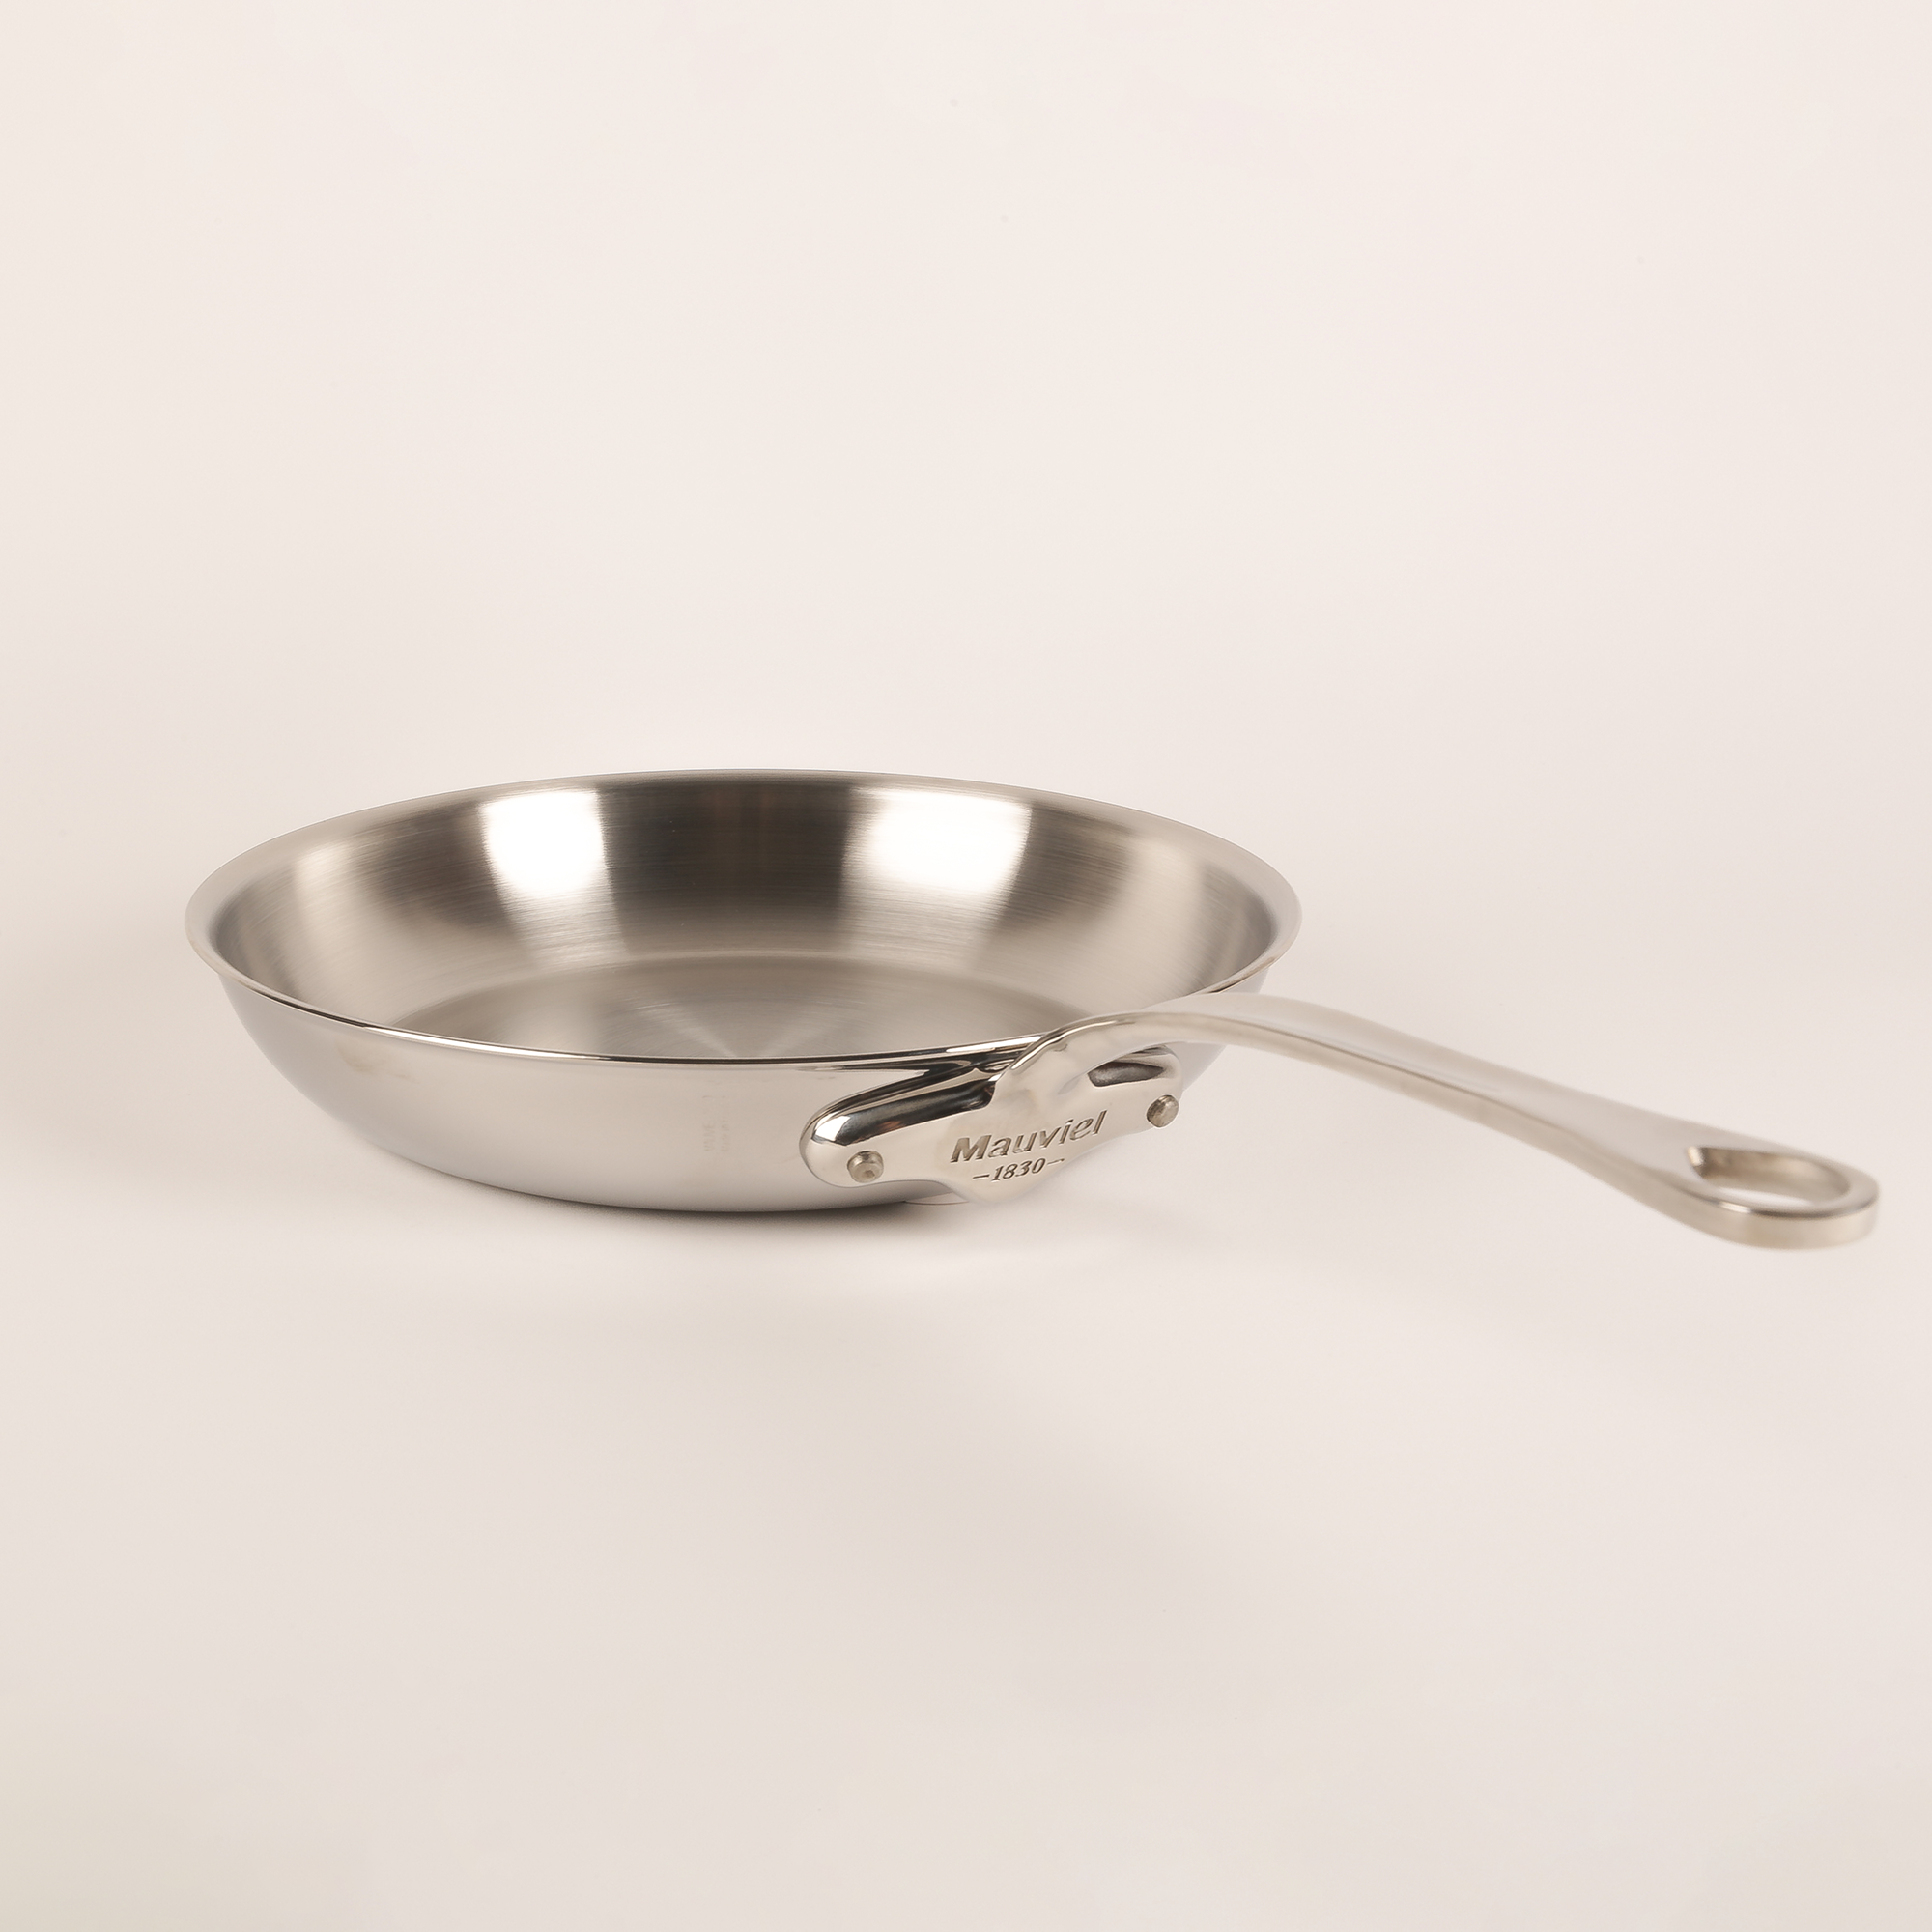 Mauviel M'URBAN 4 Tri-Ply Frying Pan With Cast Stainless Steel Handle, 7.9-in - Mauviel USA